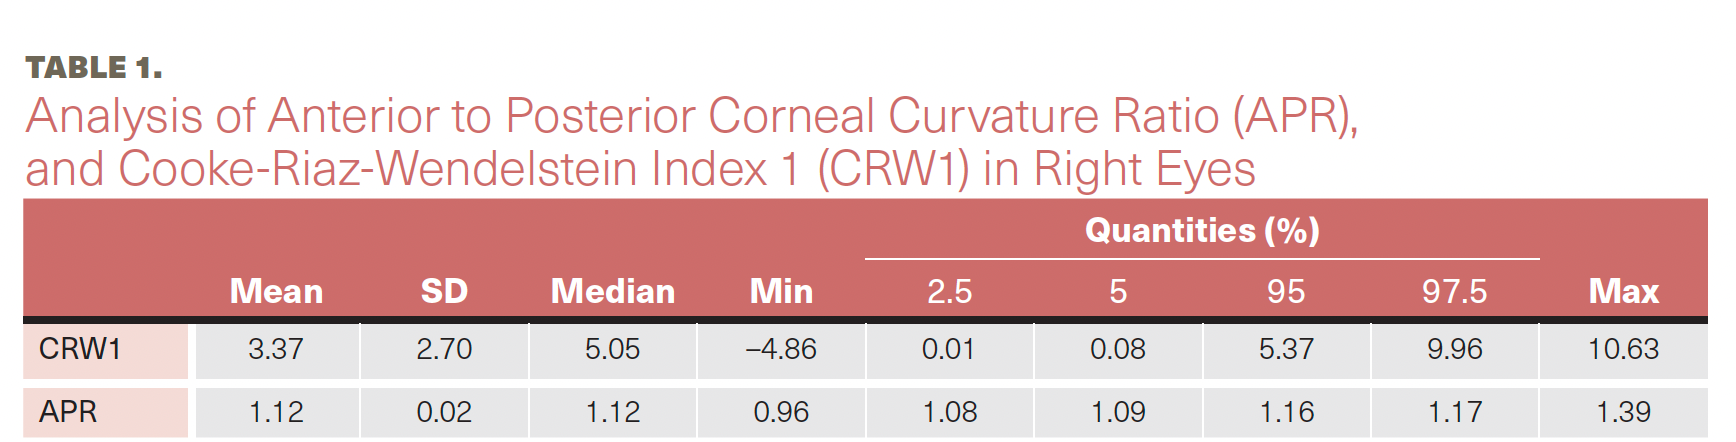 Table 1. Analysis of Anterior to Posterior Corneal Curvature Ratio (APR),  and Cooke-Riaz-Wendelstein Index 1 (CRW1) in Right Eyes